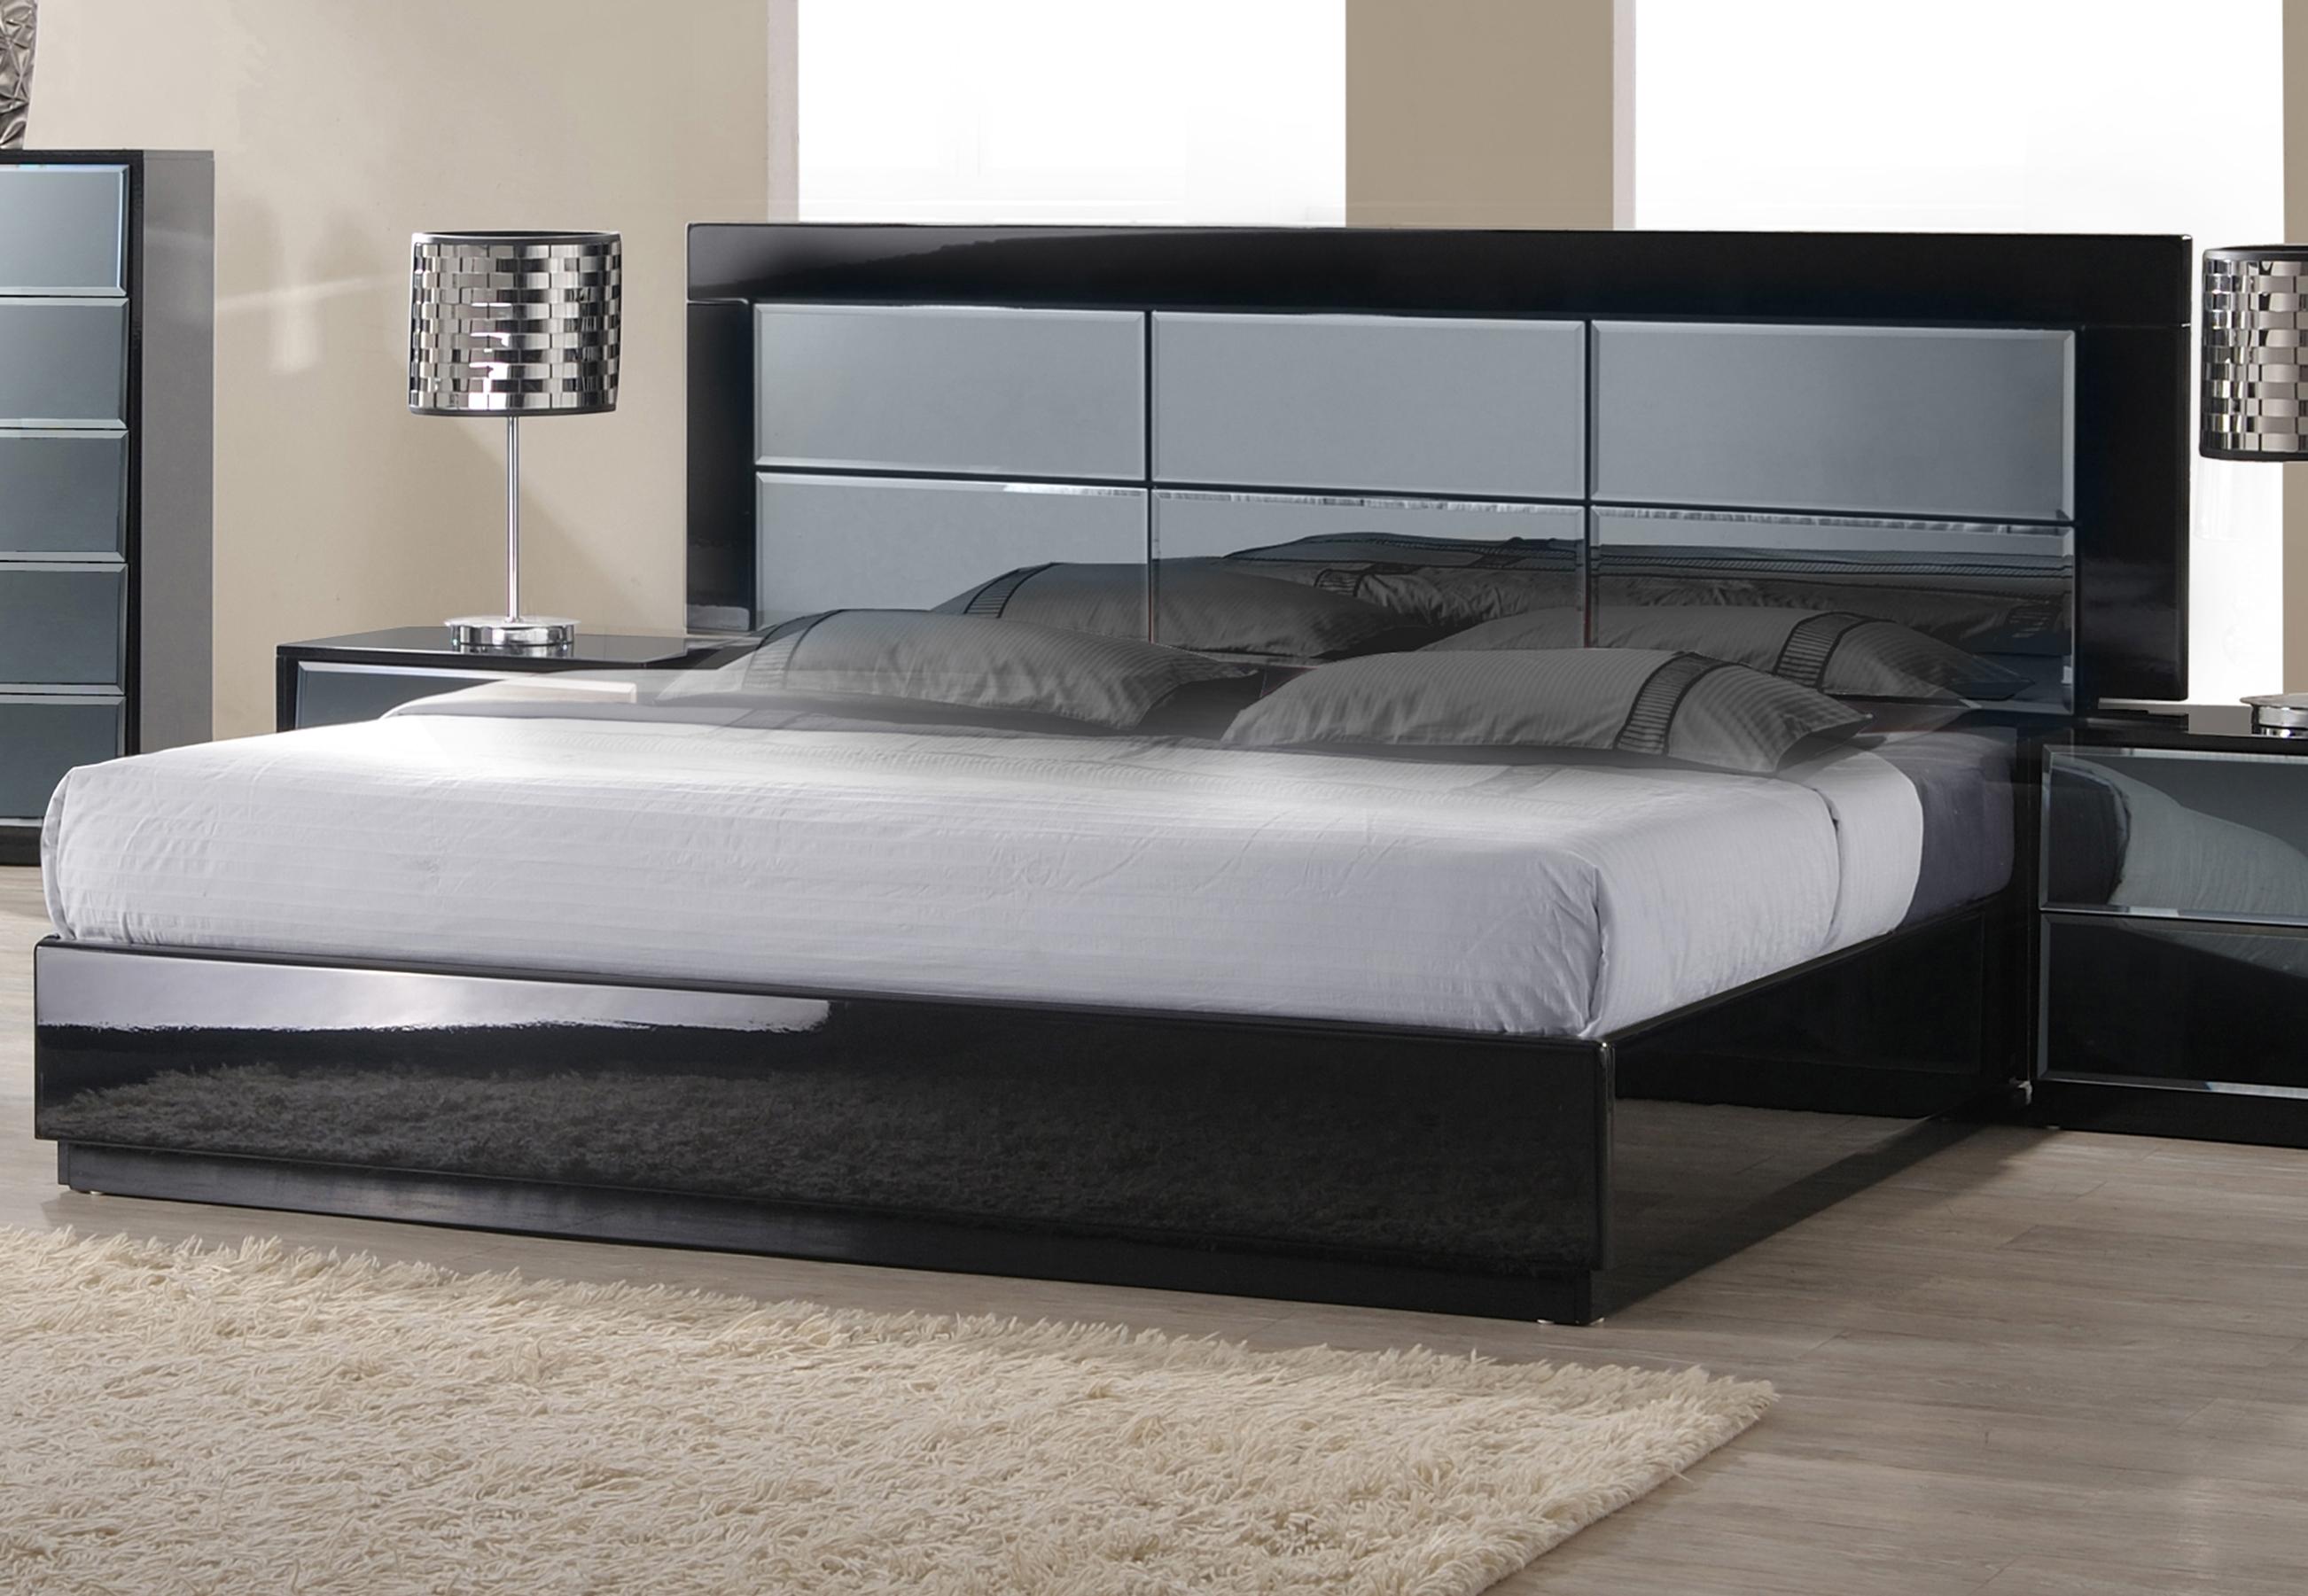 

    
High Gloss Black with Mirror Queen Size Bed Venice by Chintaly Imports
